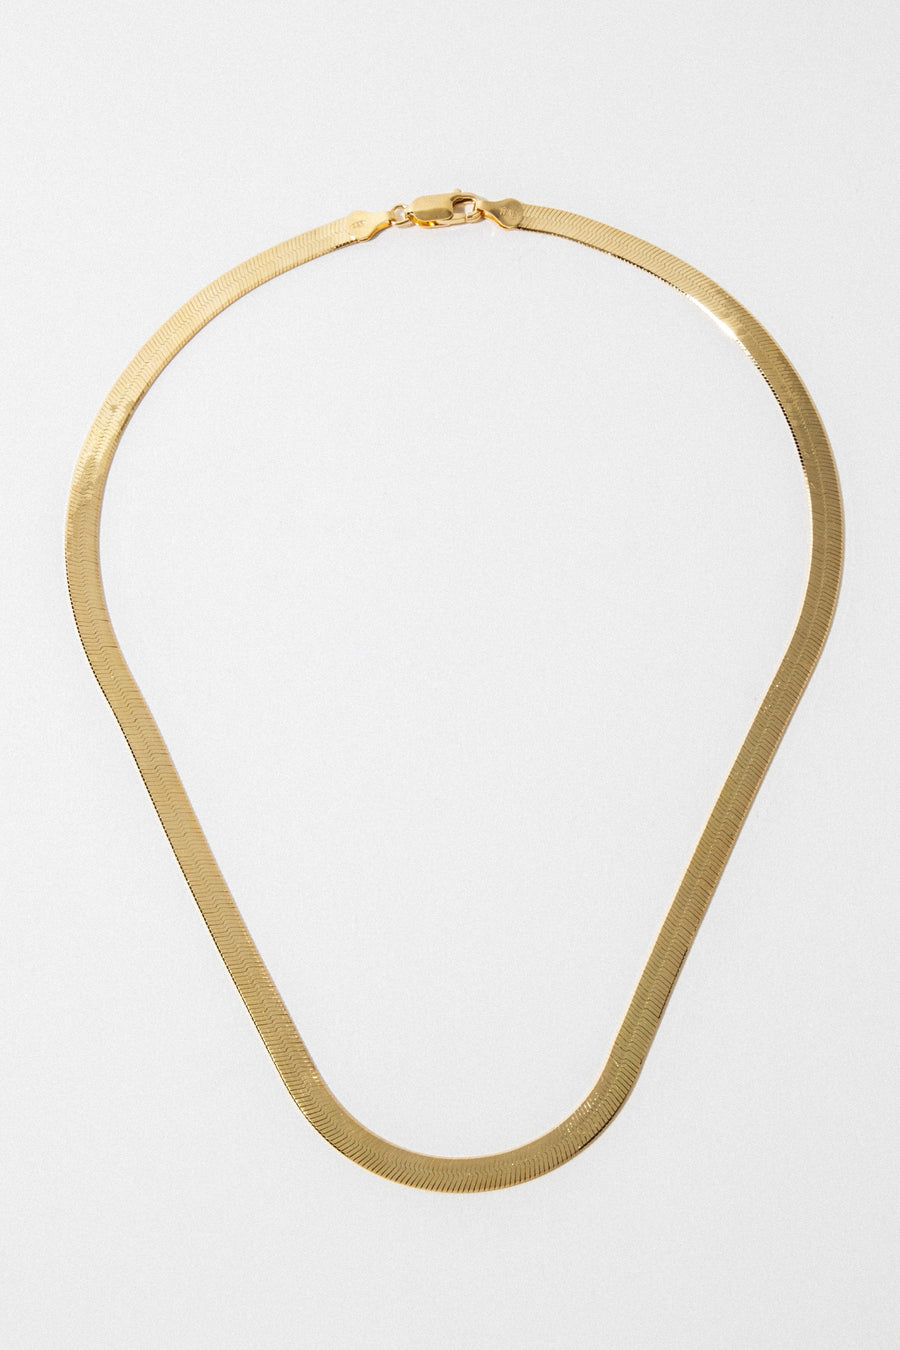 Tresor Jewelry Gold / 18 Inches King Snake Necklace